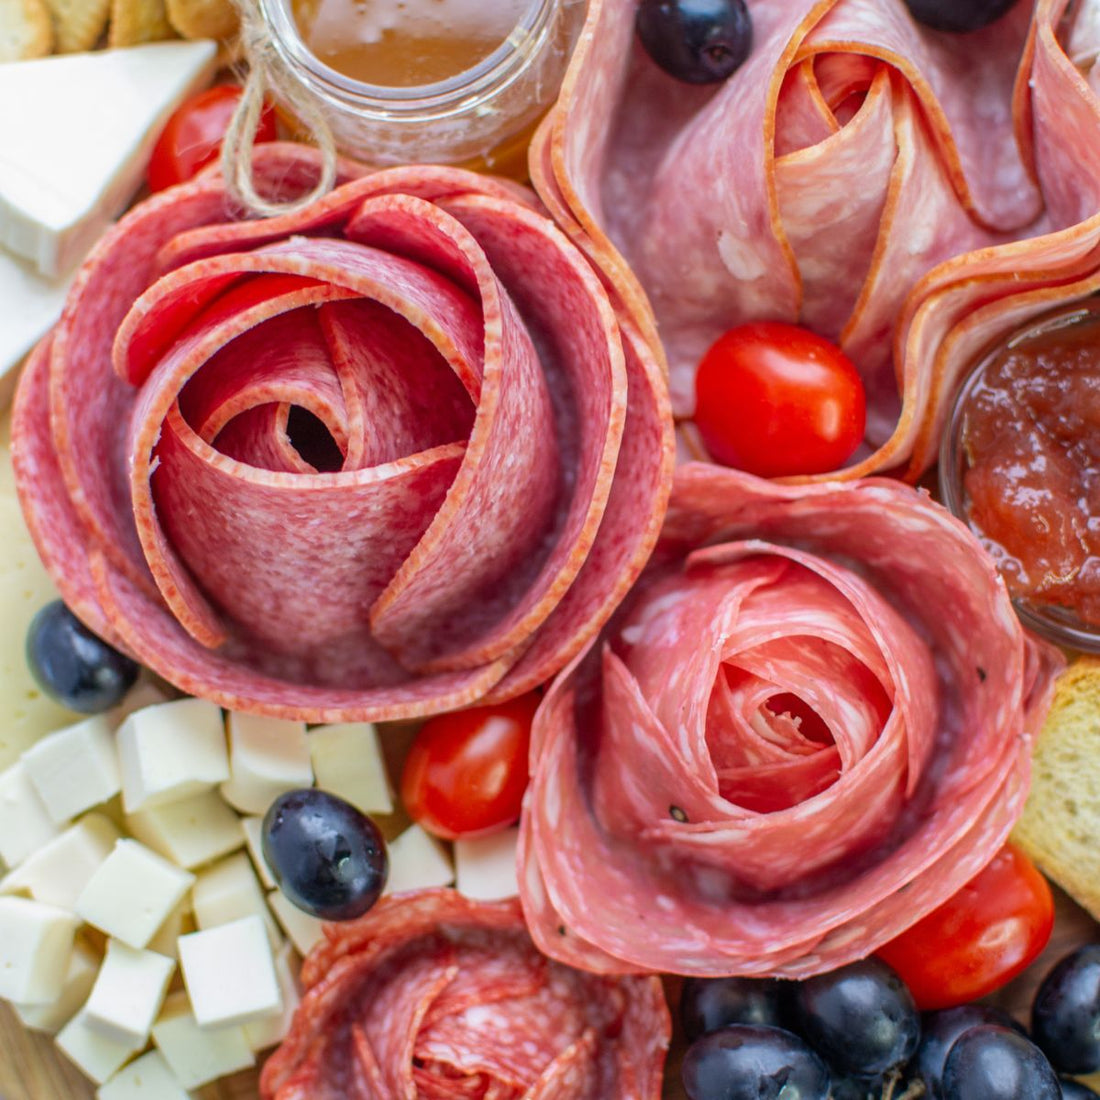 Charcuterie Meat Flower and Rose - Step by Step guide